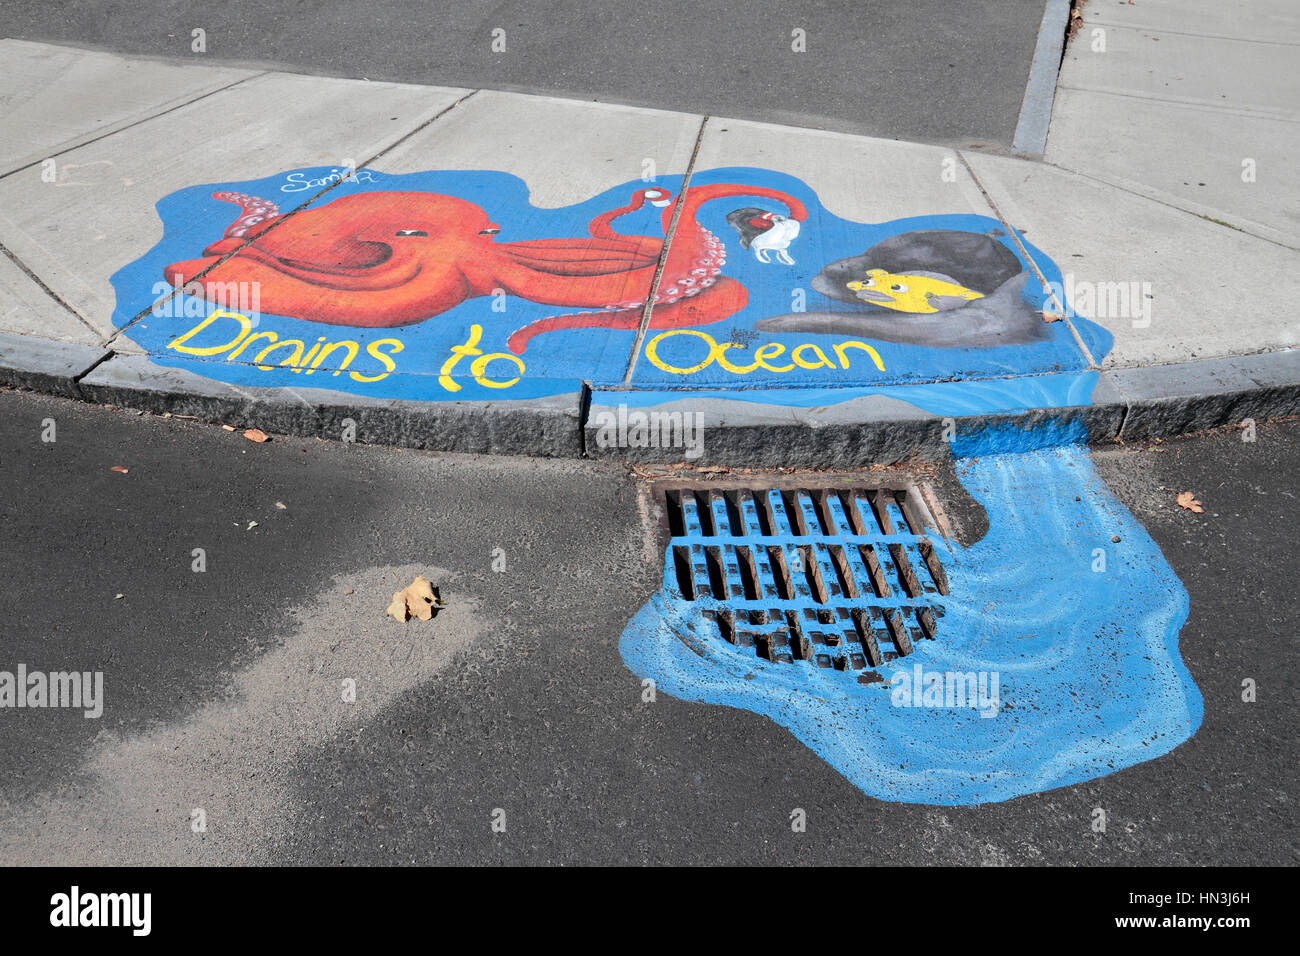 Painted drain cover and surround, part of the  'Drain SmART Salem' public art project in Salem, Massachusetts, United States. Stock Photo